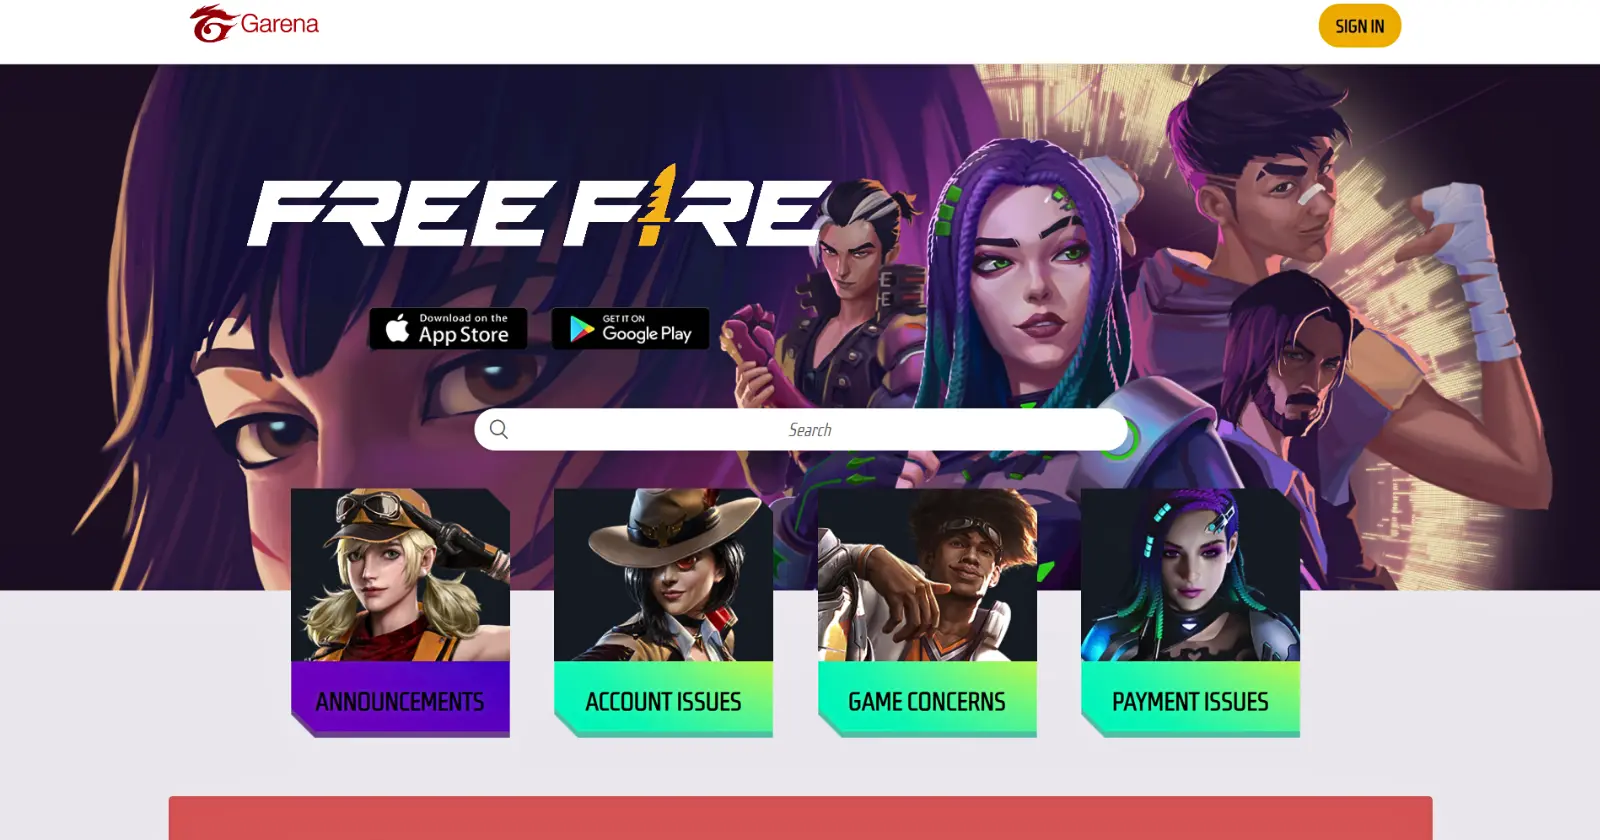 Free Fire Customer Service website screenshot, featuring a Vibrant banner, animated characters, options for announcements, account, game, payment issues.